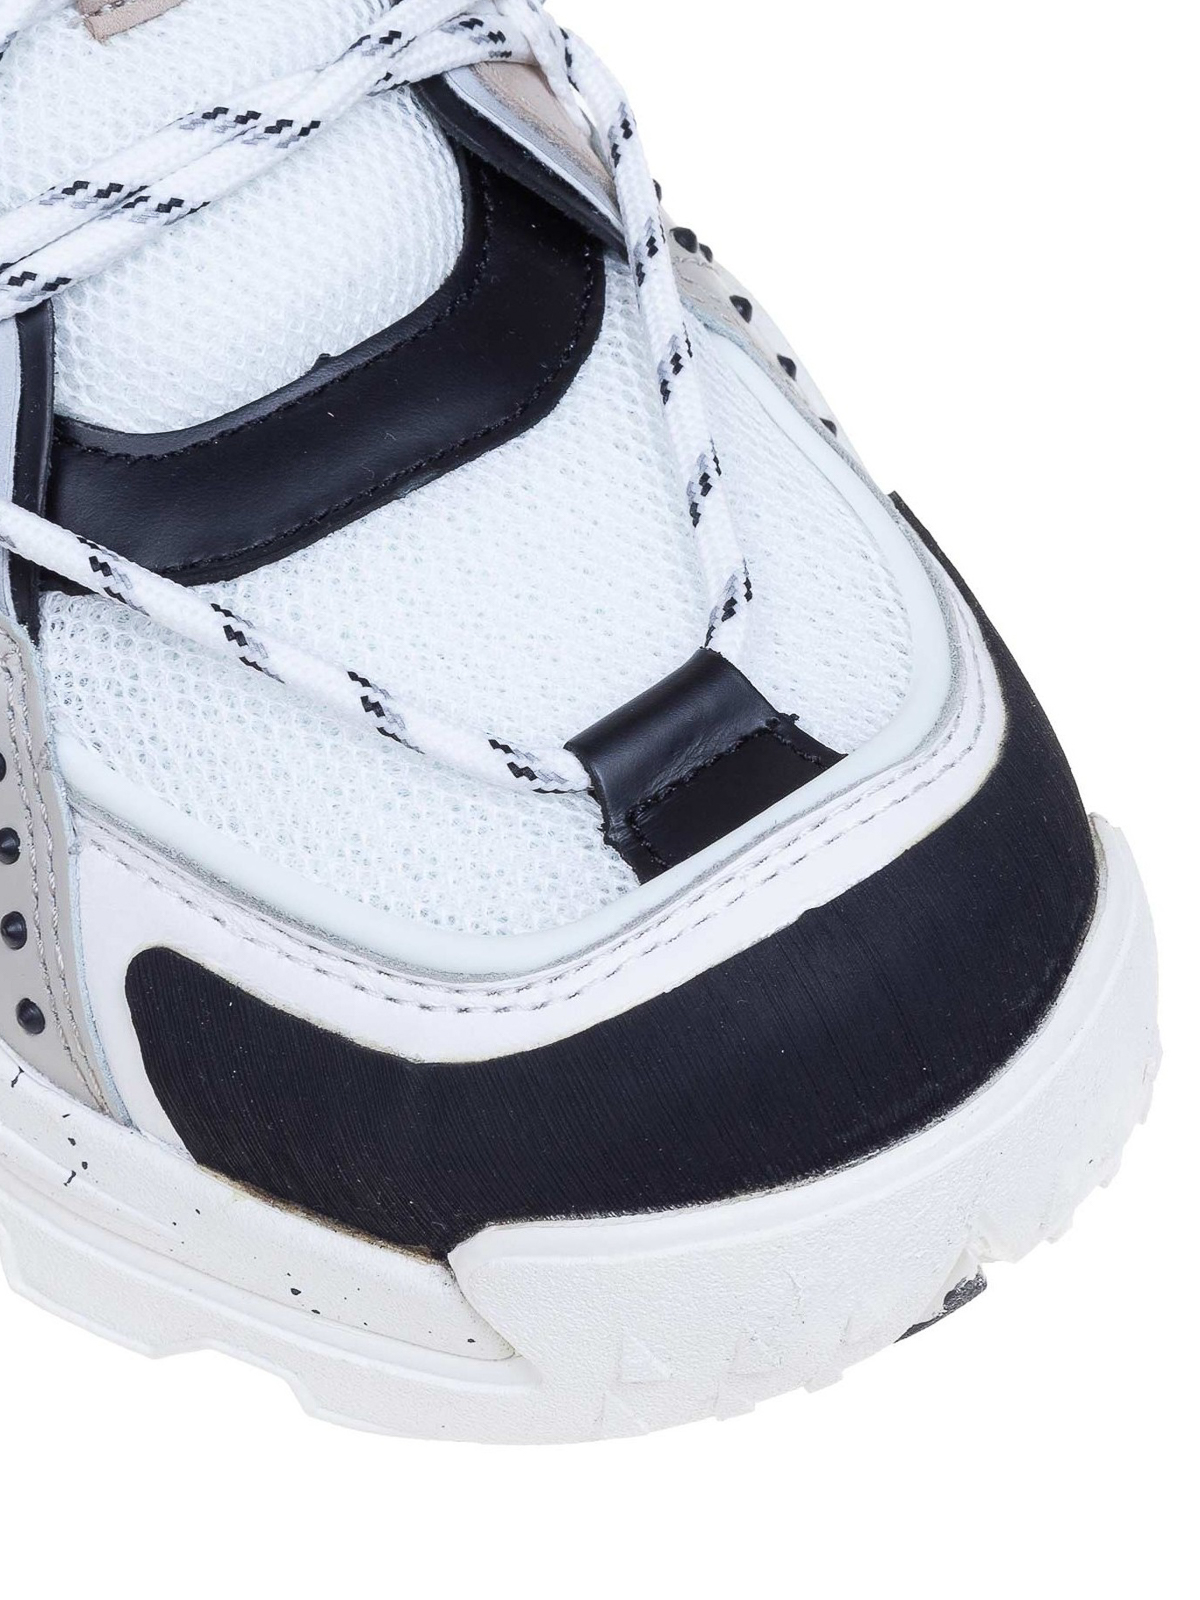 Trainers Kenzo - Inka mixed material sneakers - F965SN300L6993 